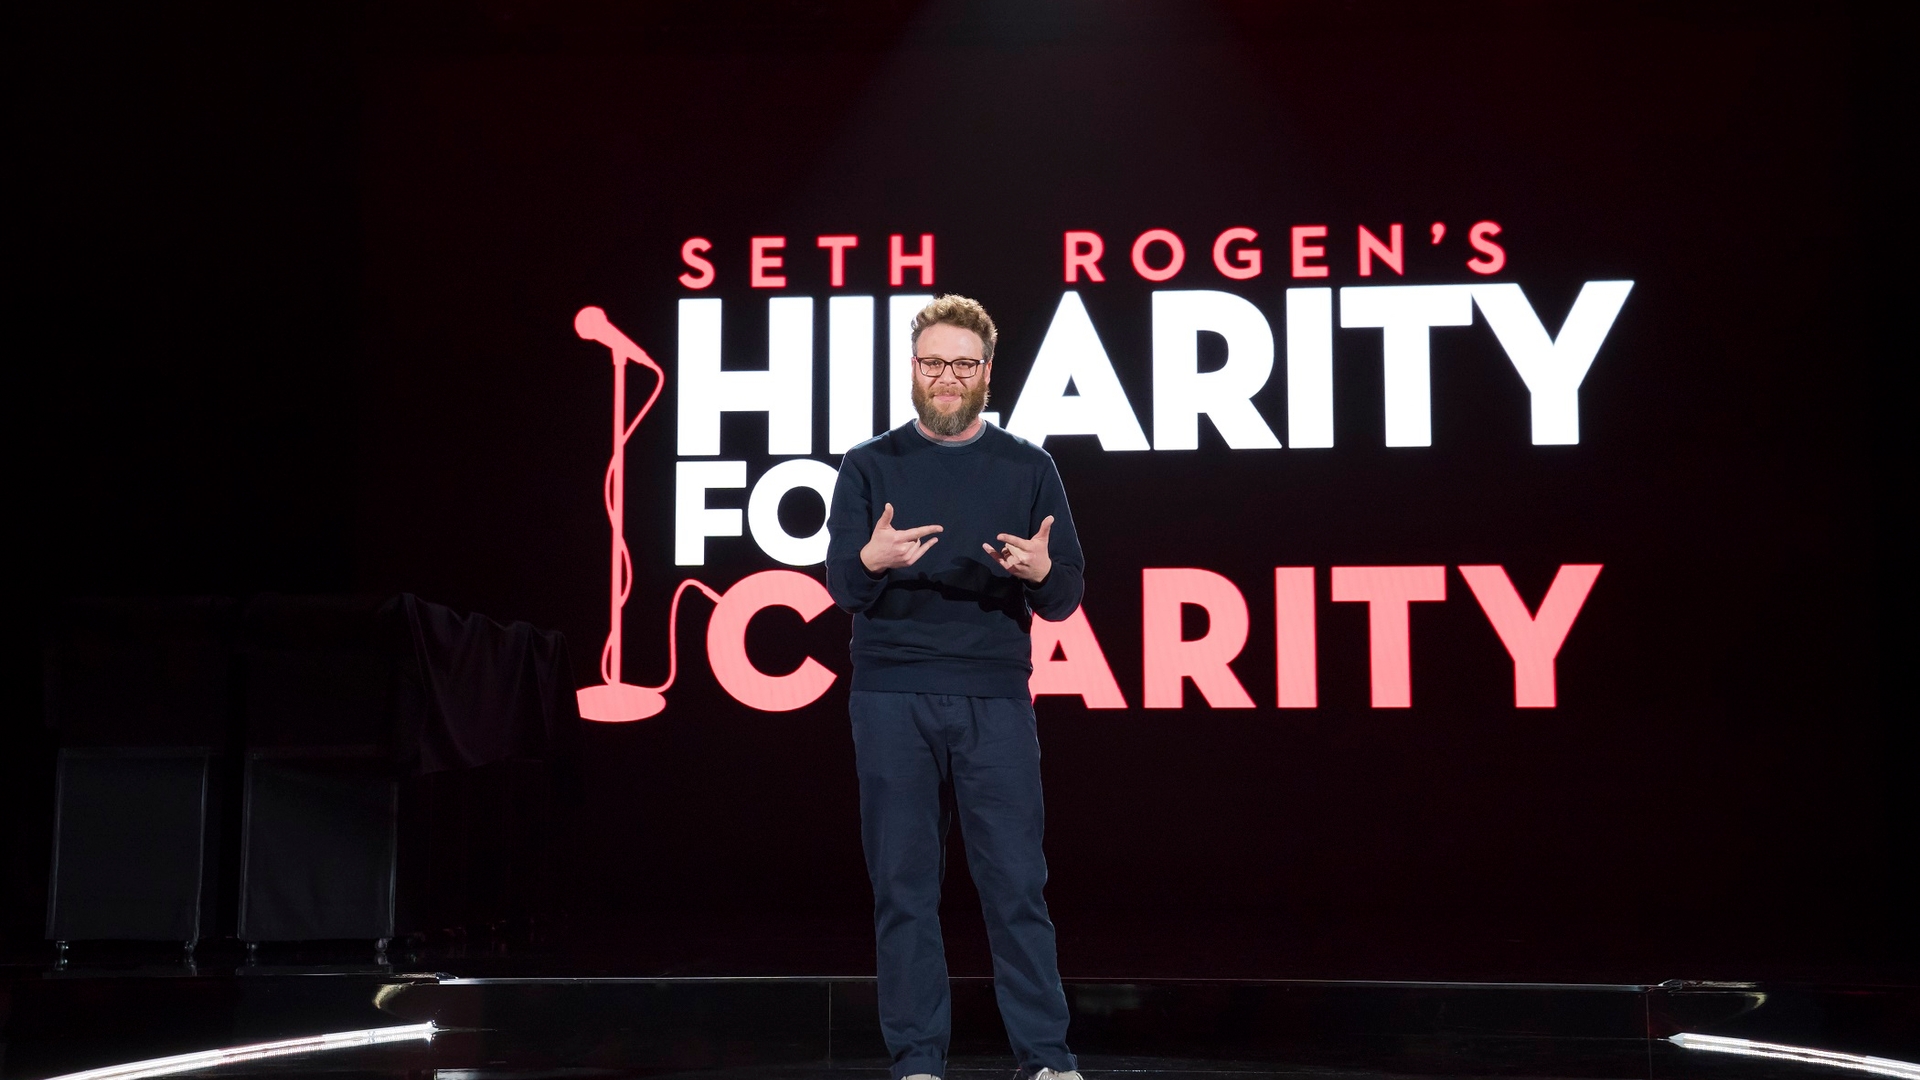 Seth Rogen's Hilarity for Charity